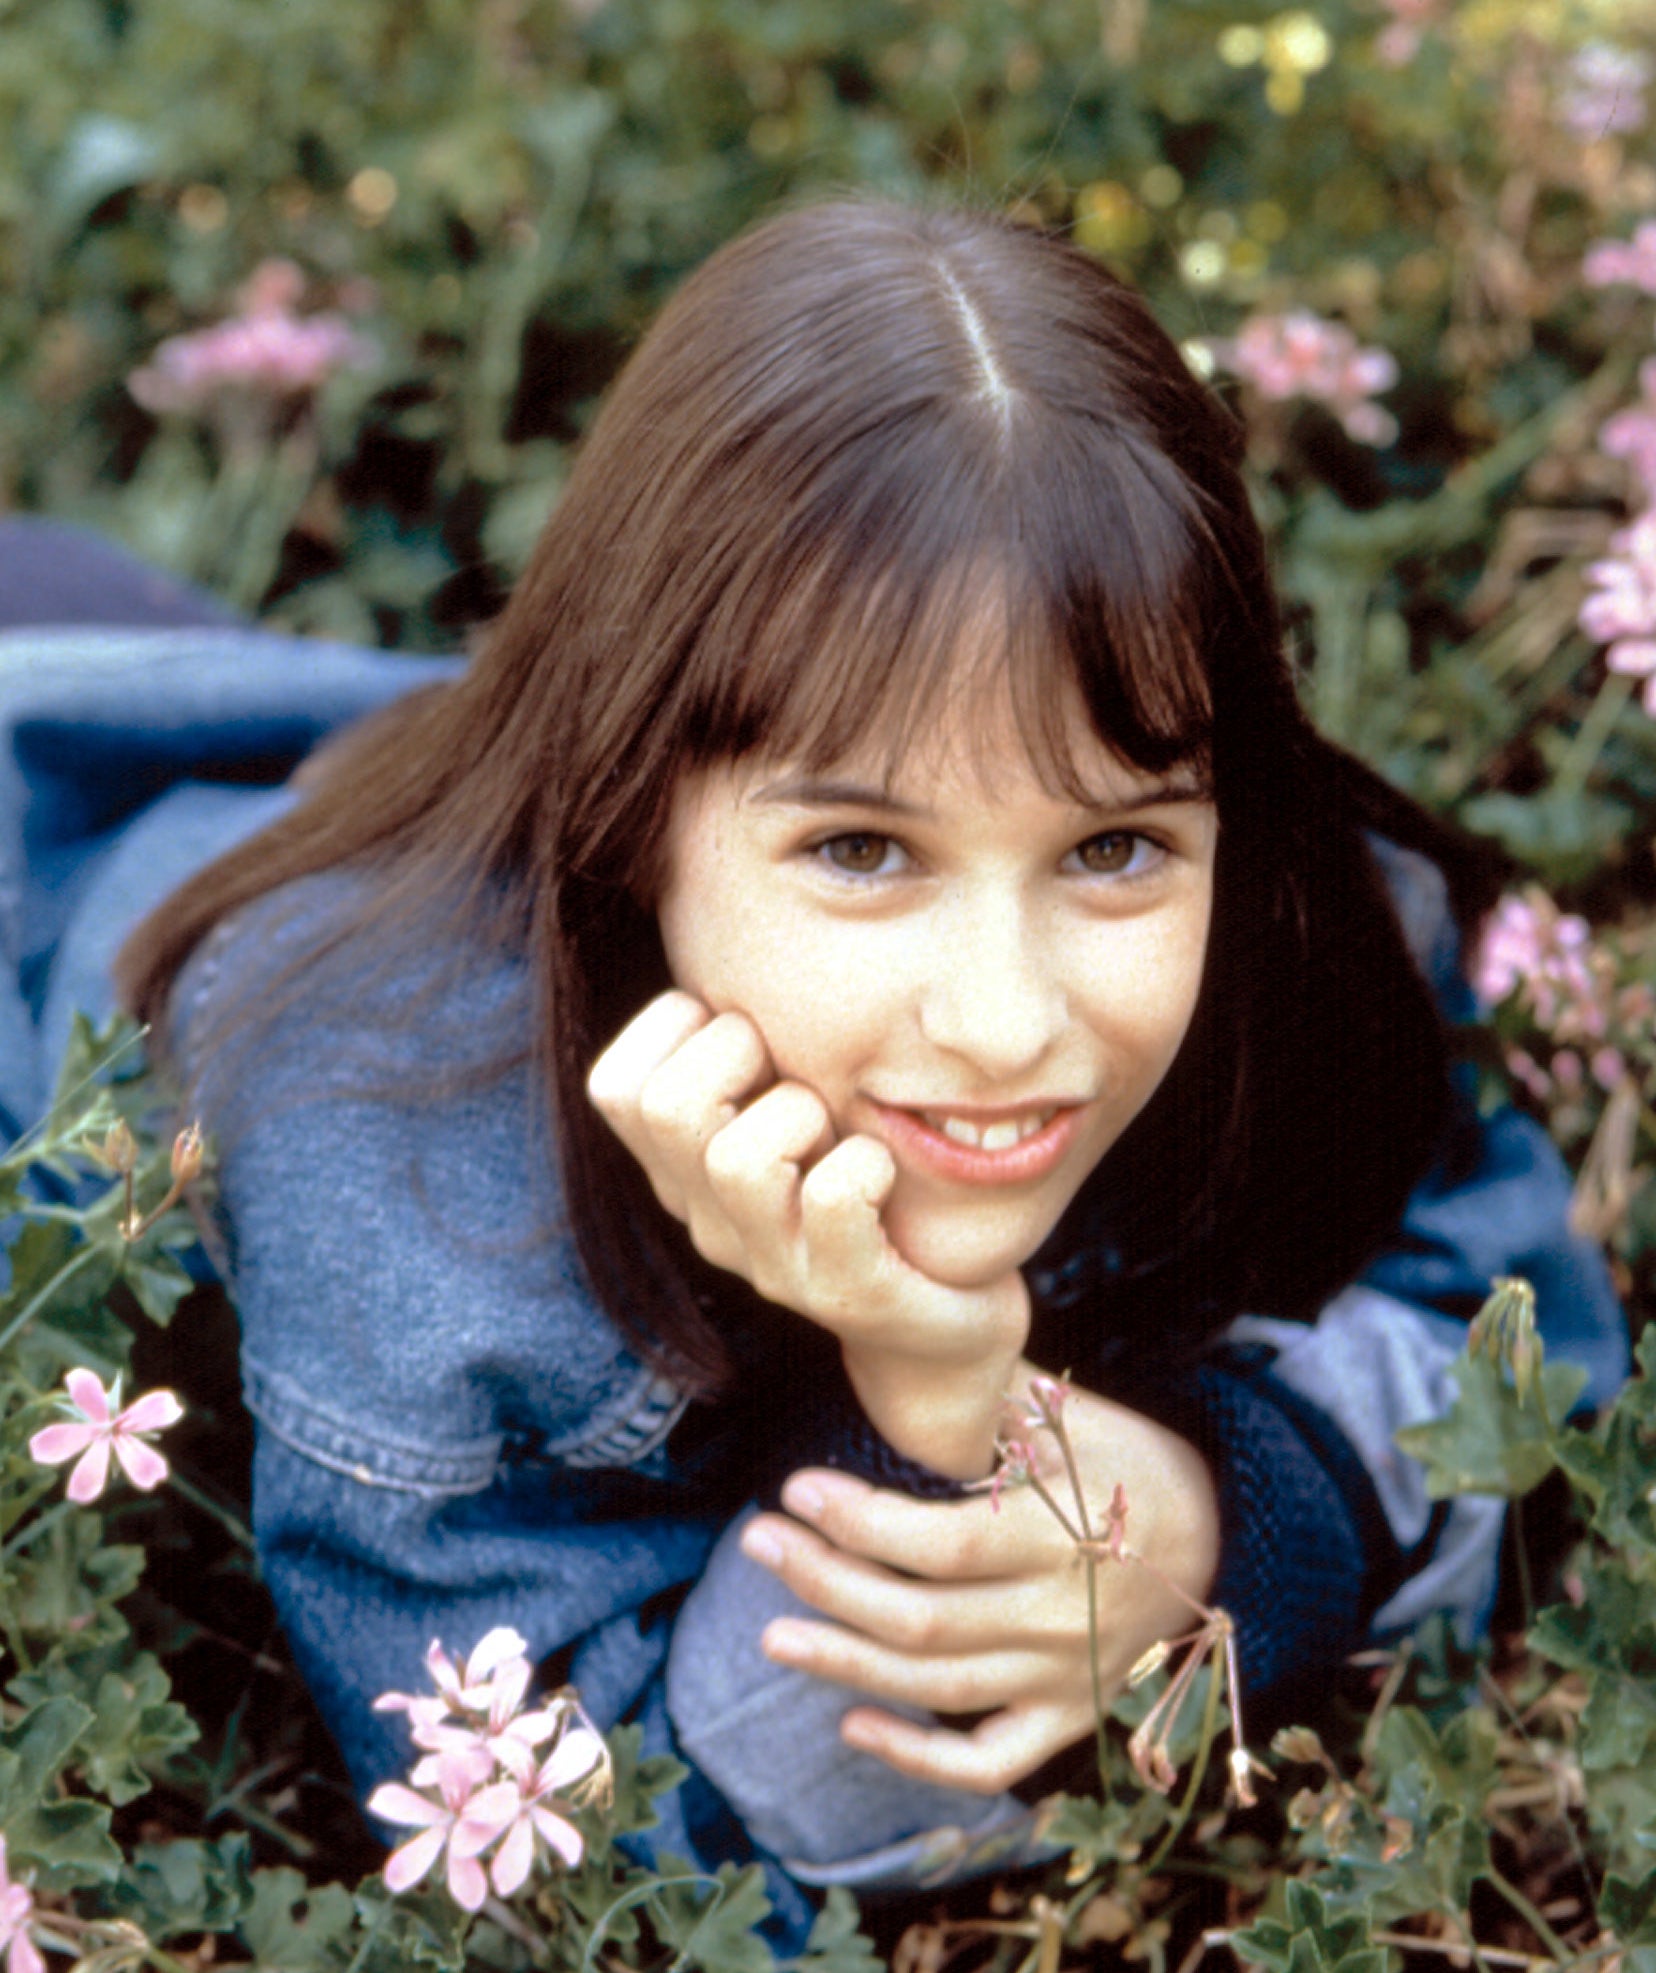 Lacey Chabert in Party of Five